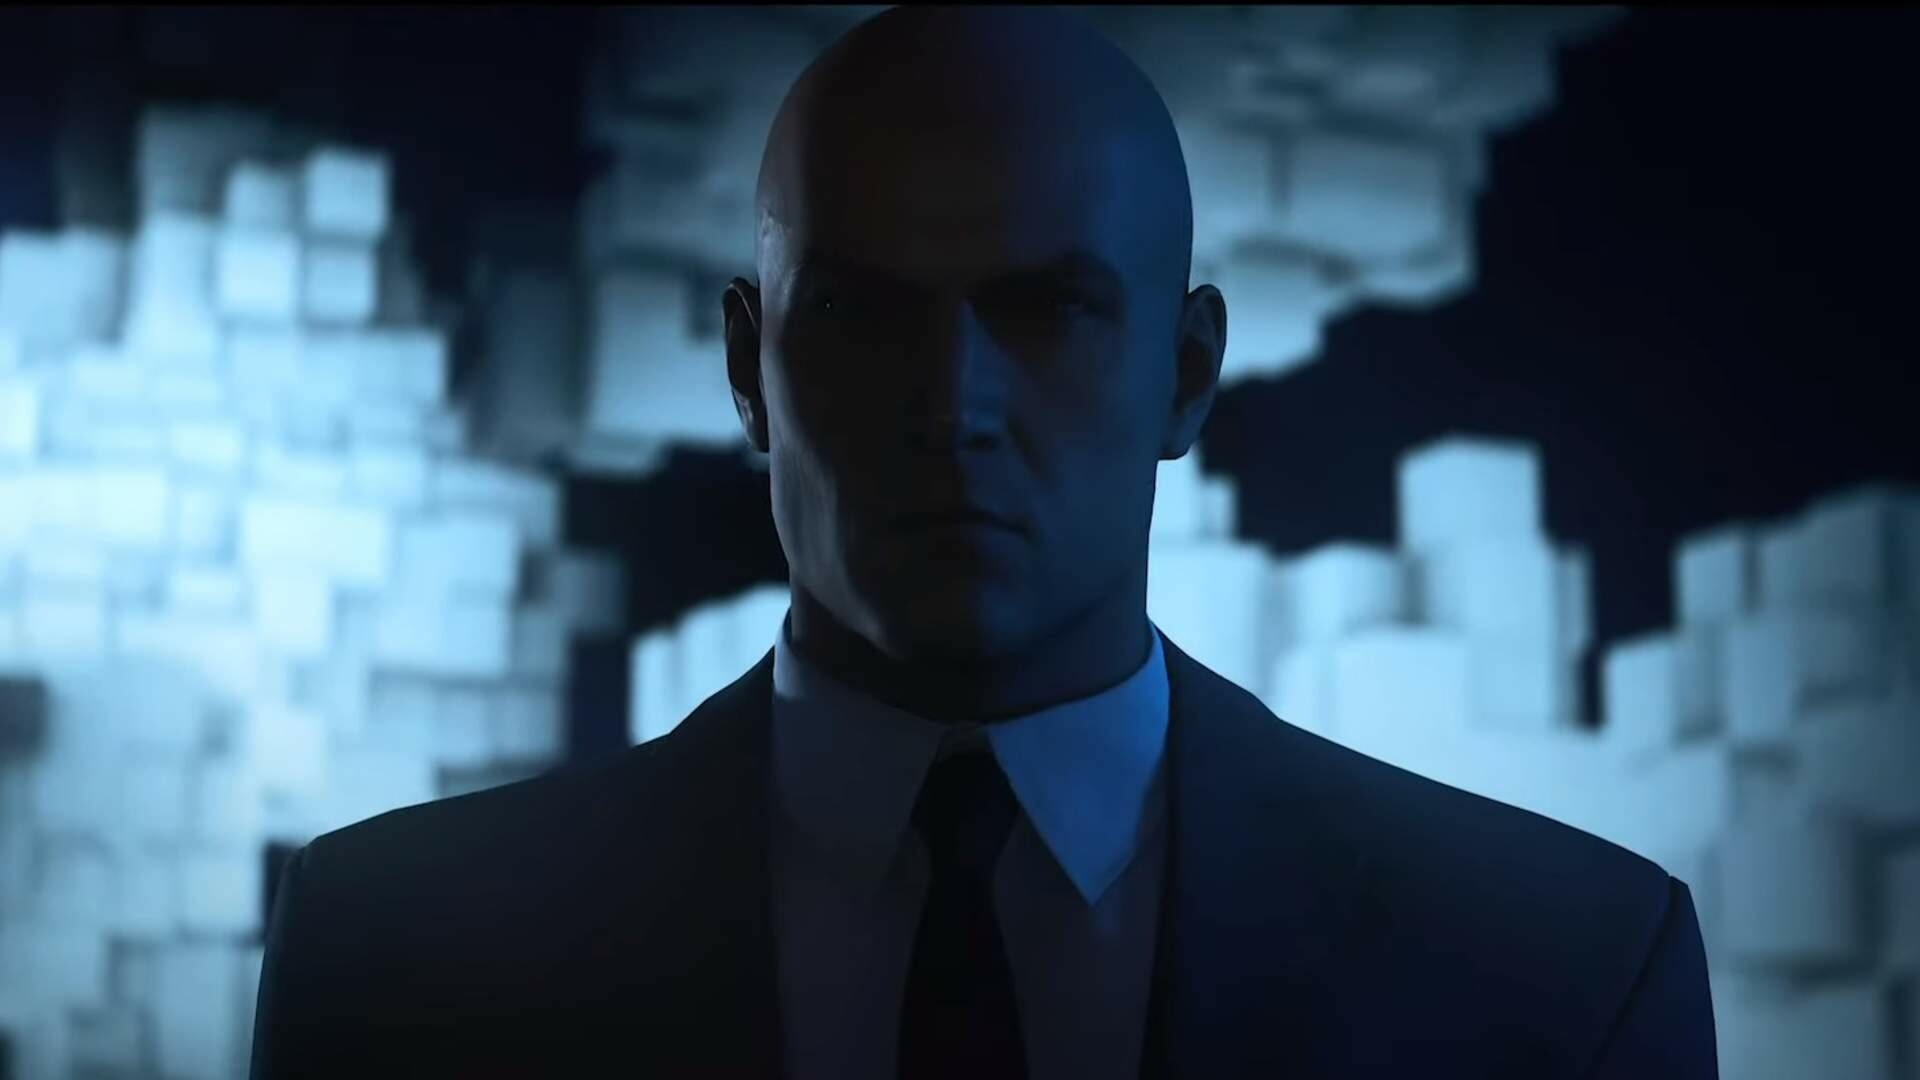 Hitman (Game): Presented from a third-person perspective, with a focus on interactive elements in 47's environment. 1920x1080 Full HD Wallpaper.